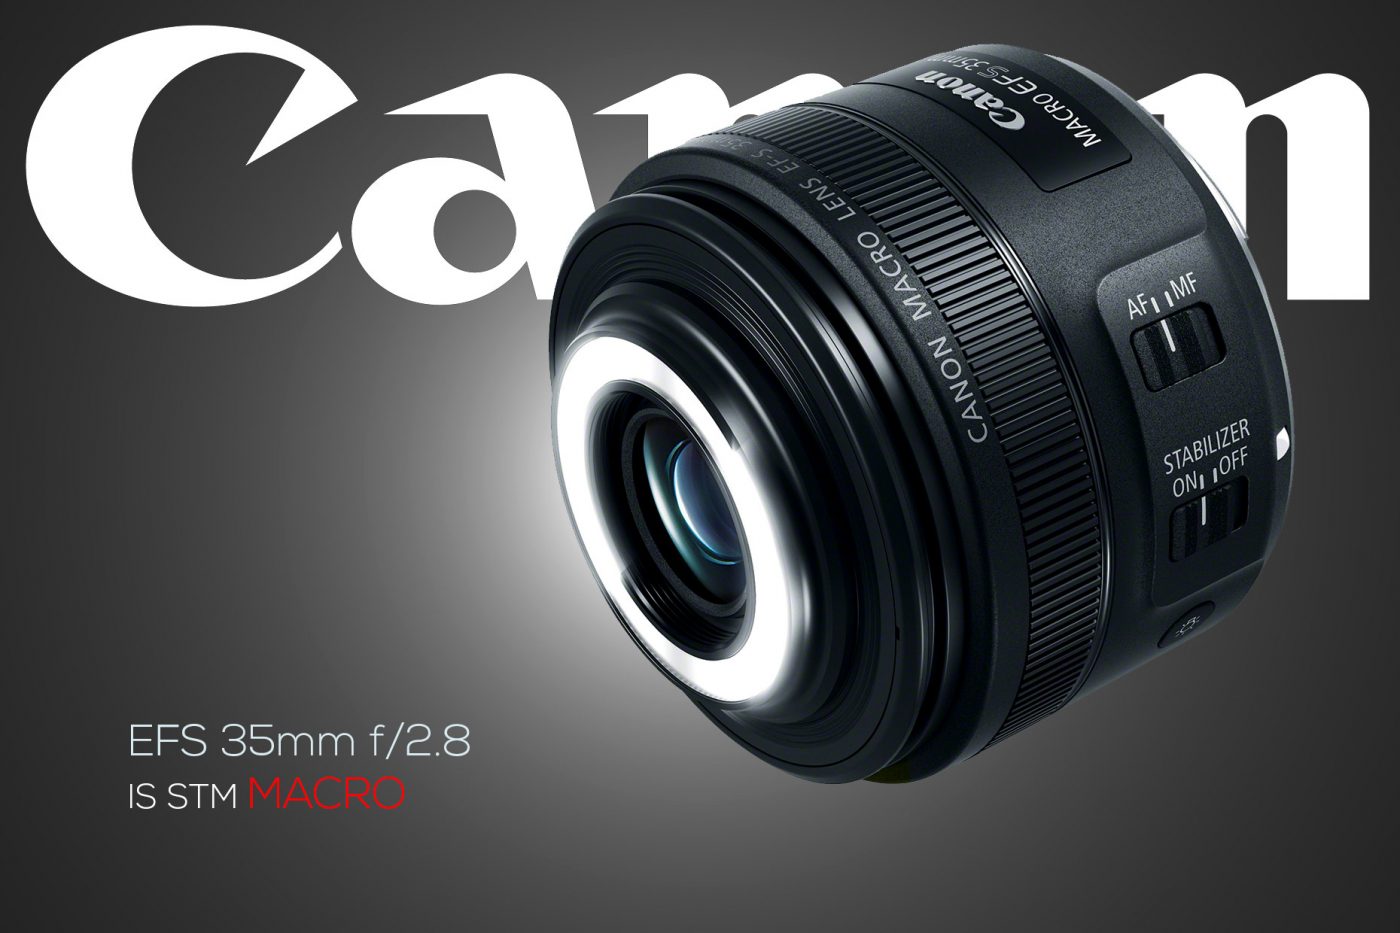 Canon Announces EF-S 35mm f/2.8 IS STM Macro Lens - Light And Matter